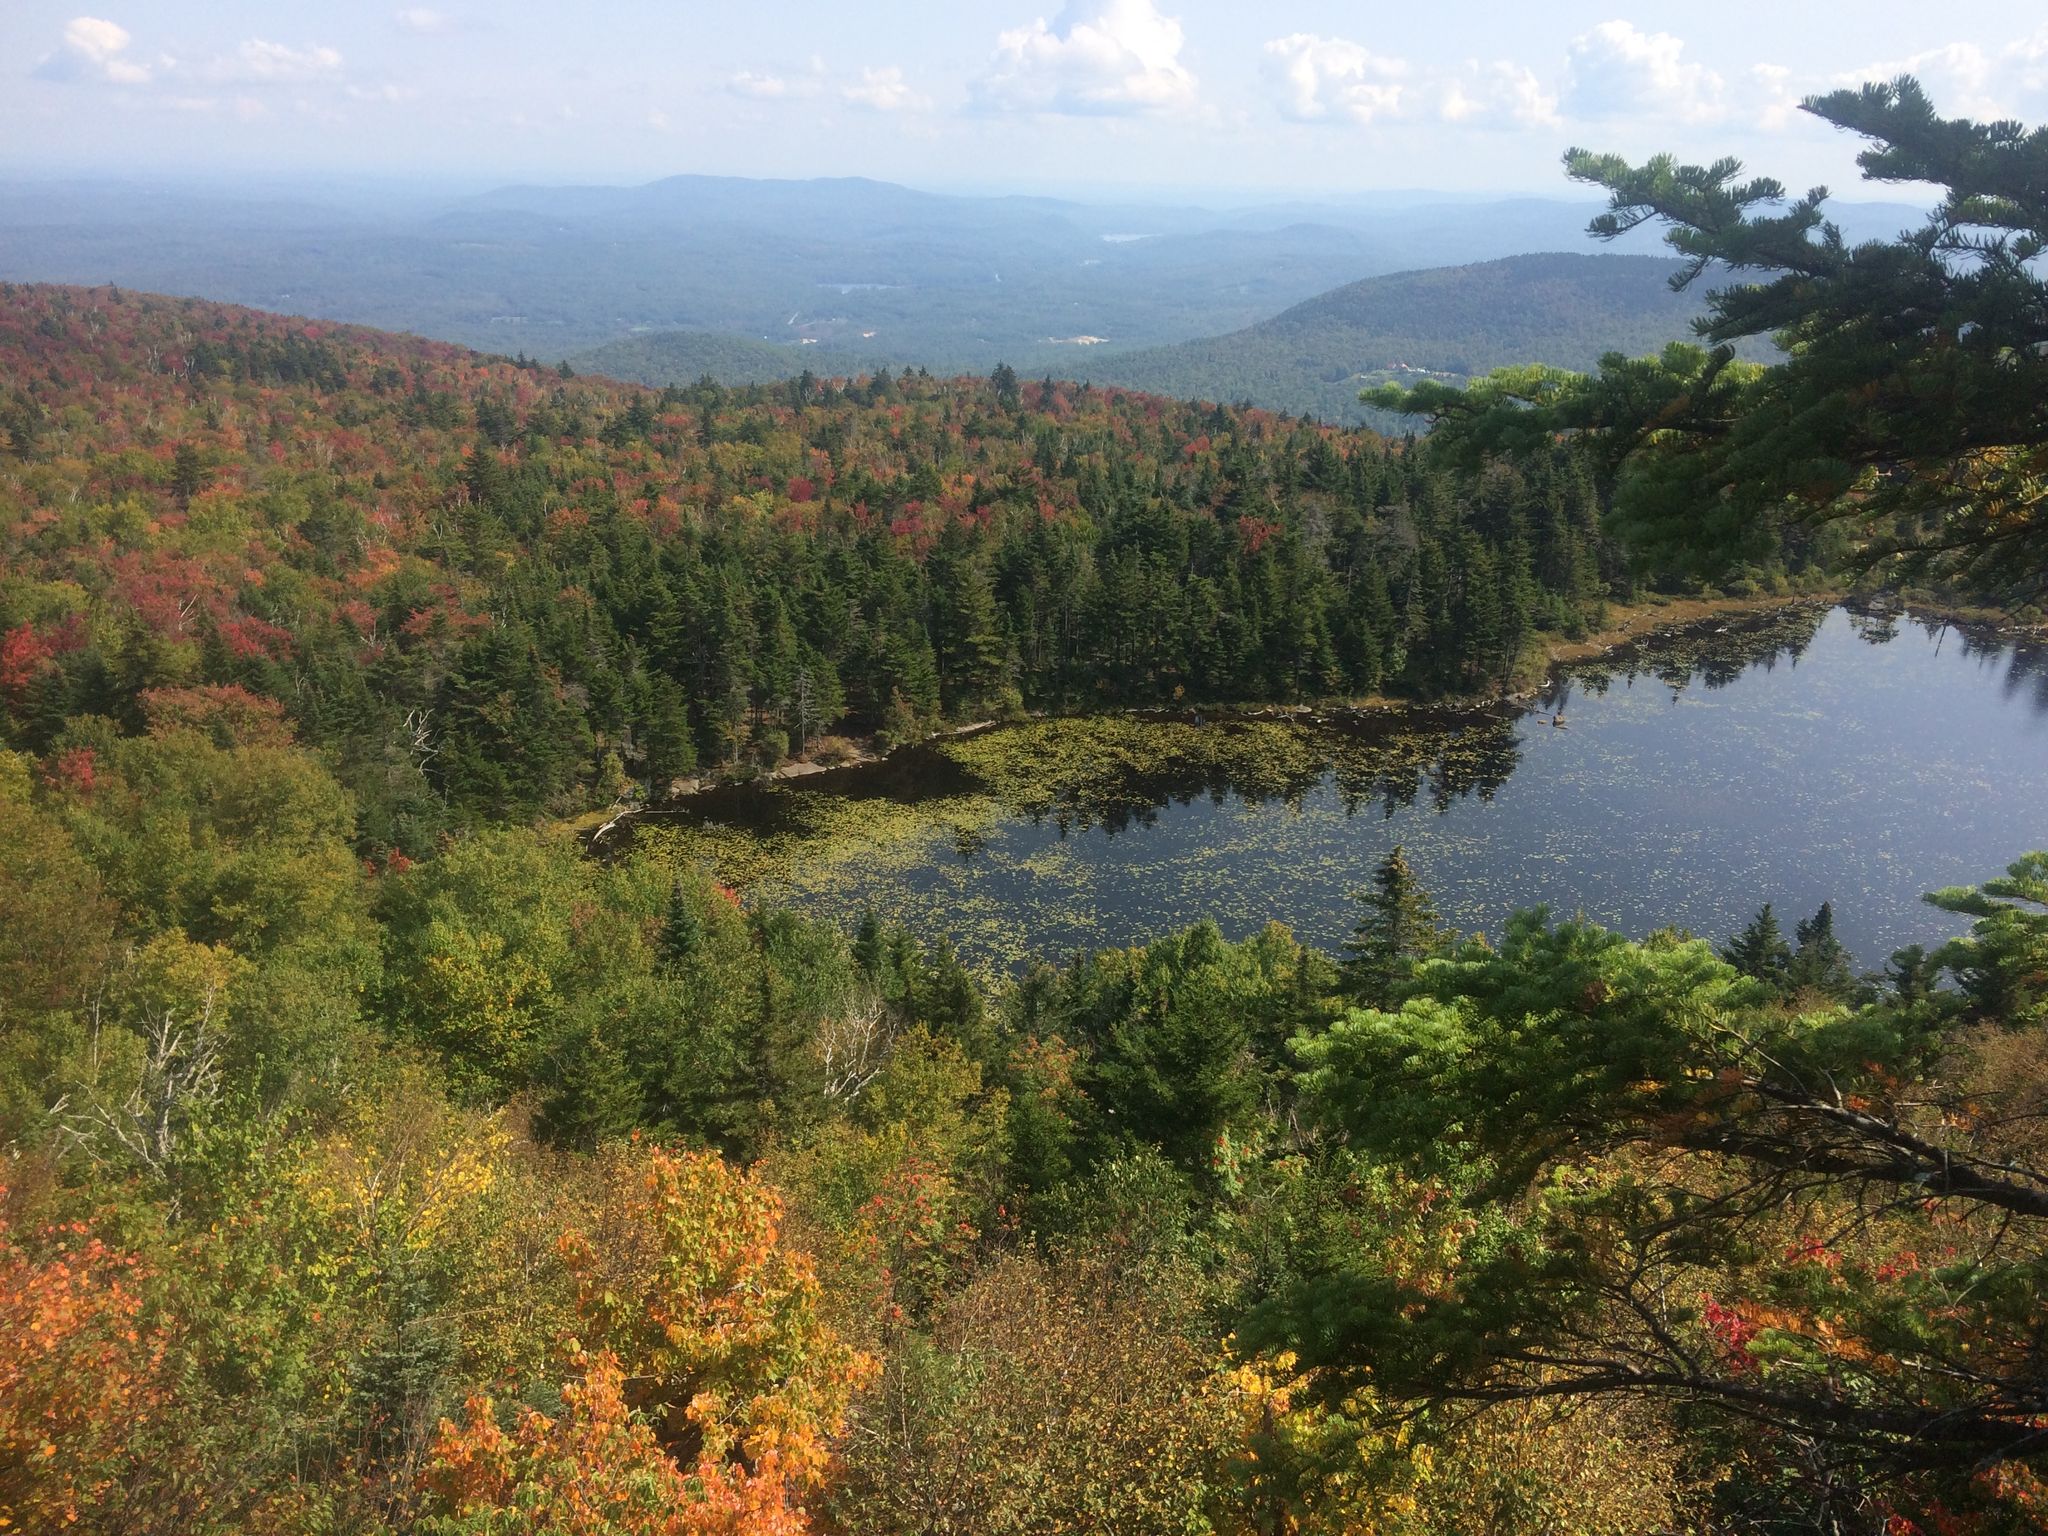 Lake Solitude as seen from White's Ledges, with surrounding fall foliage